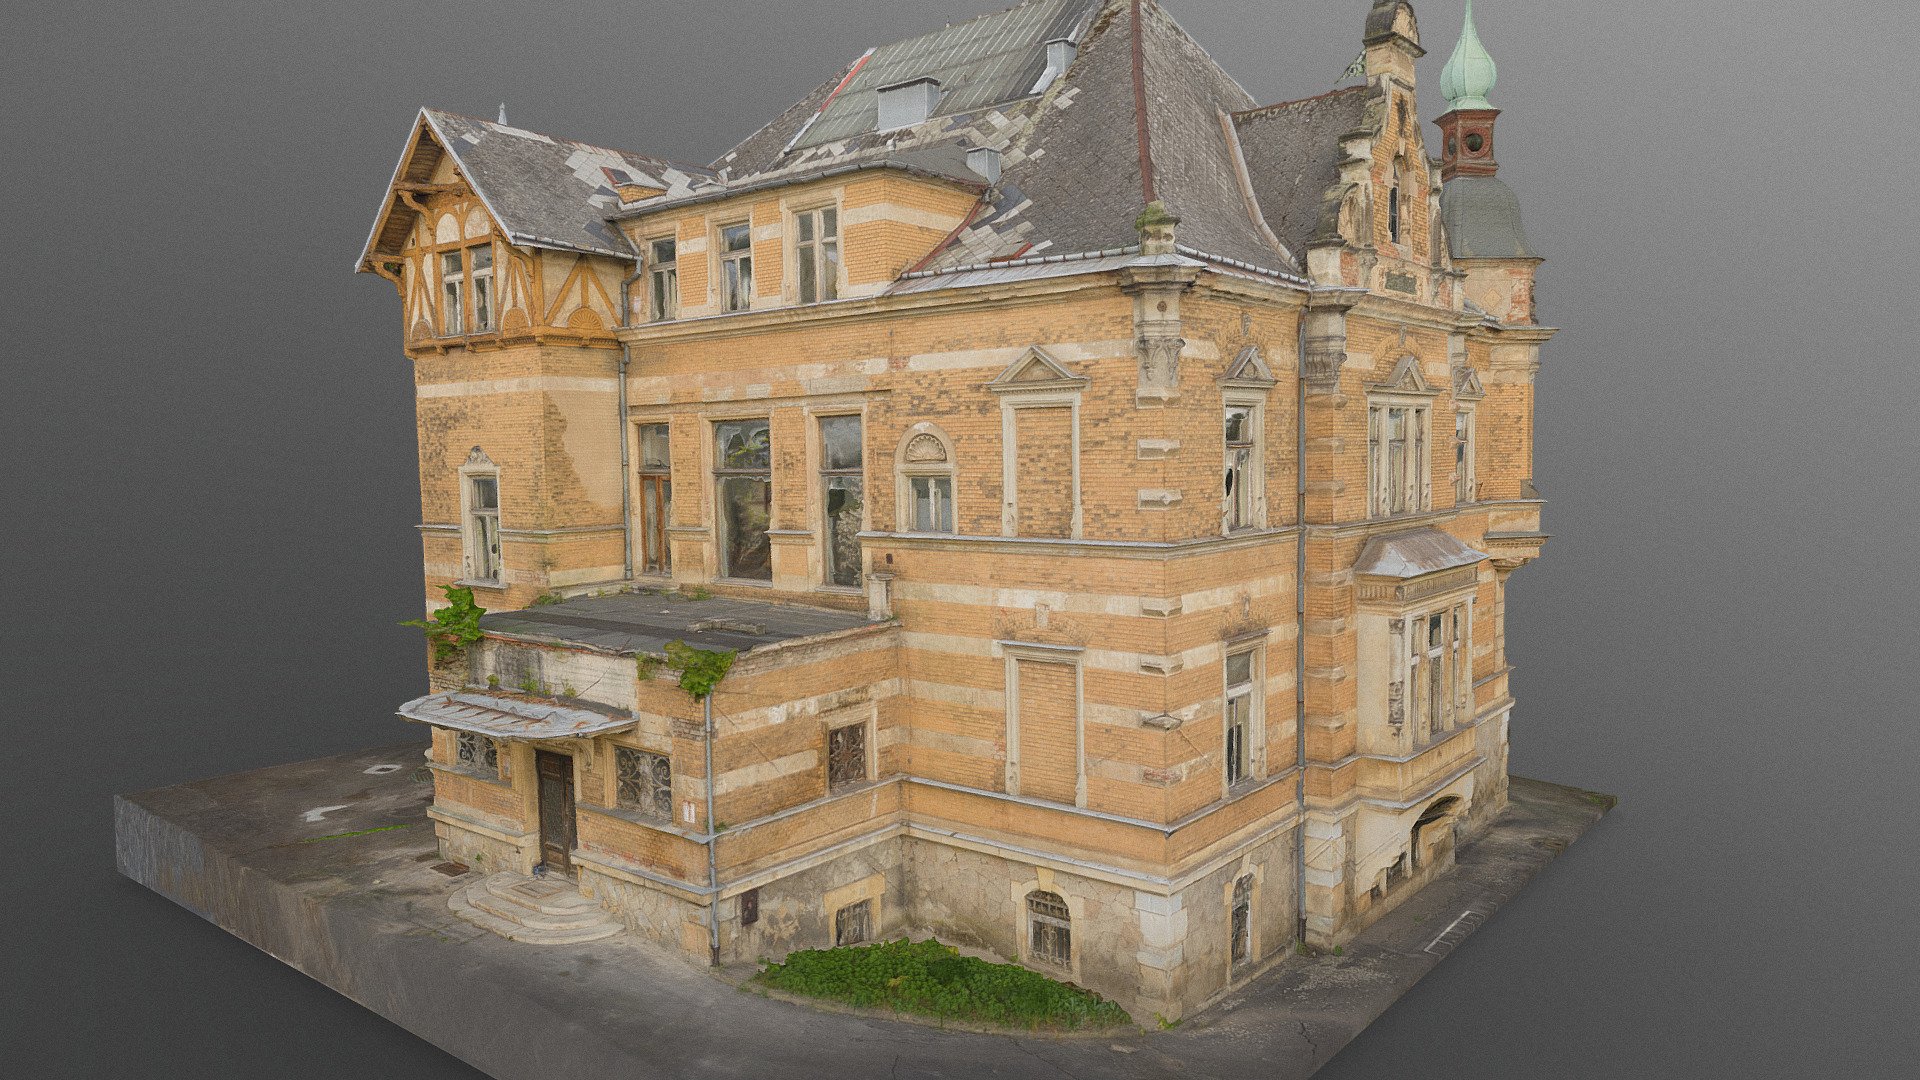 Old former child cildren abandoned orphanage Historic old classic classical german19th 20th century ruined derelict abandoned asylum house villa building cracked concrete facade scene 3D model 

photogrammetry scan (350x36MP), 5x8K texture +HD normals - contact me for source photos or re-exports - Abandoned orphanage ruin - Buy Royalty Free 3D model by matousekfoto 3d model